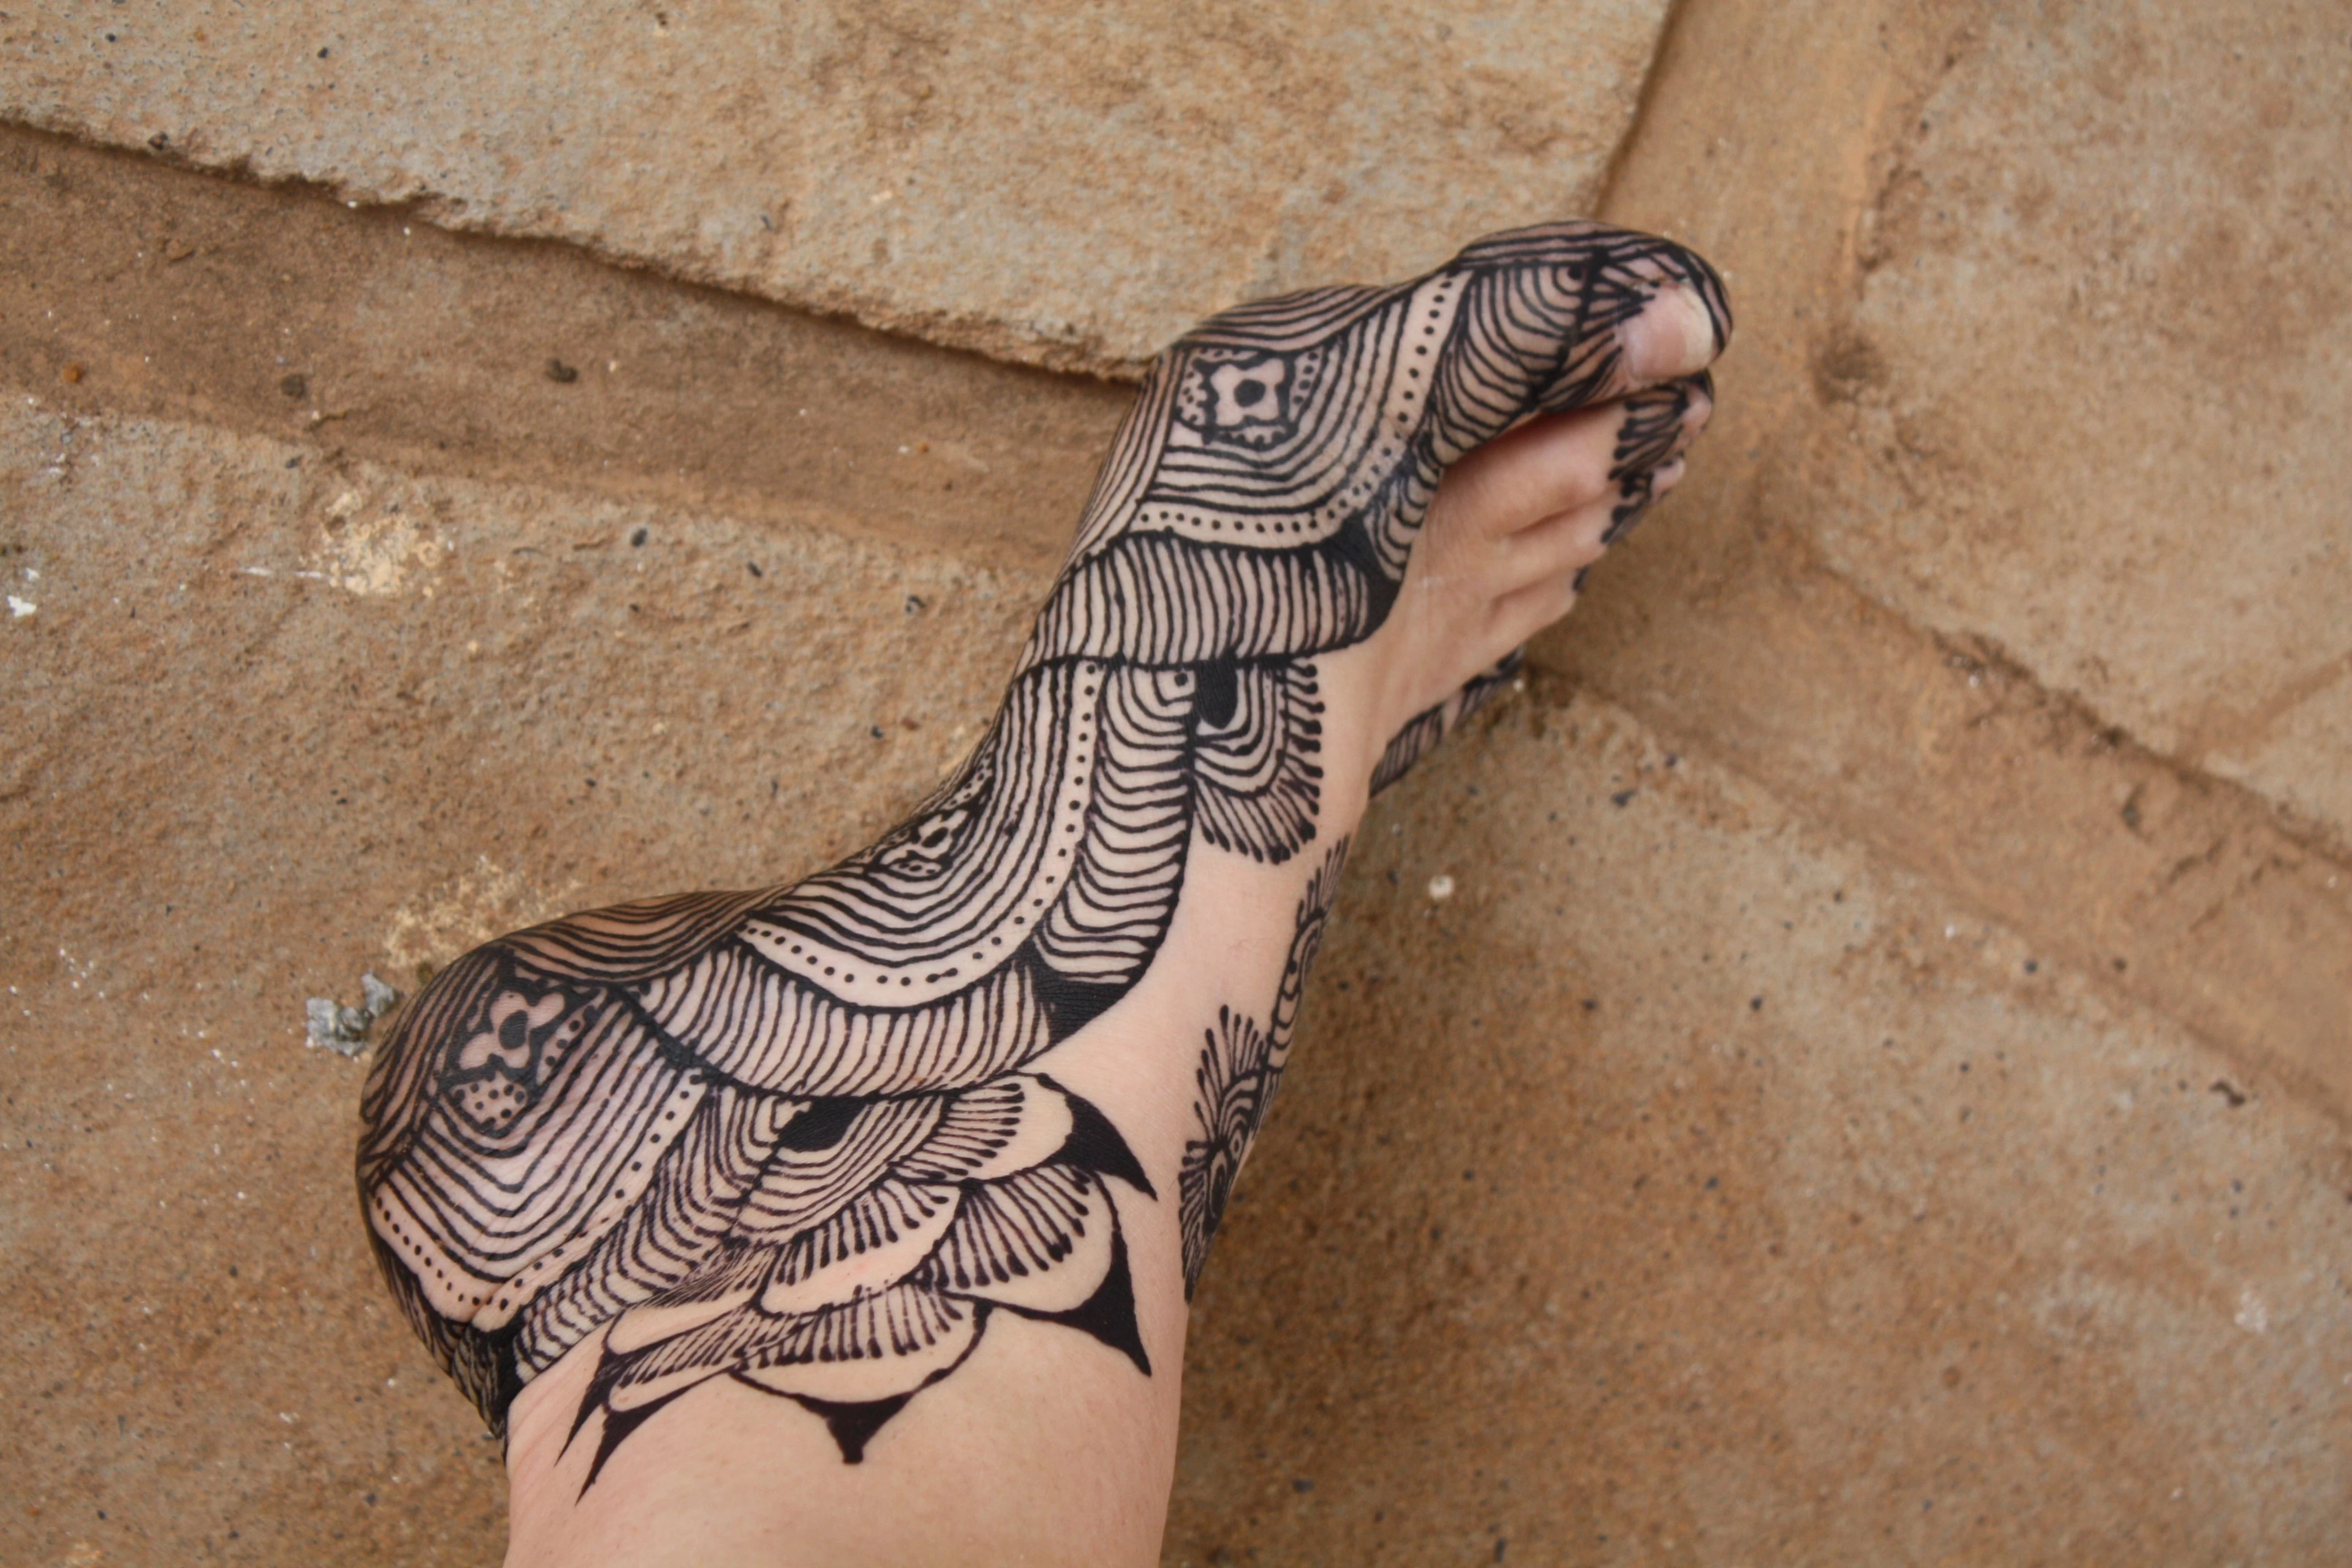 ornamental black henna tattoo, on the sole and ankle of a leg, resting on the ground, temporary henna tattoos